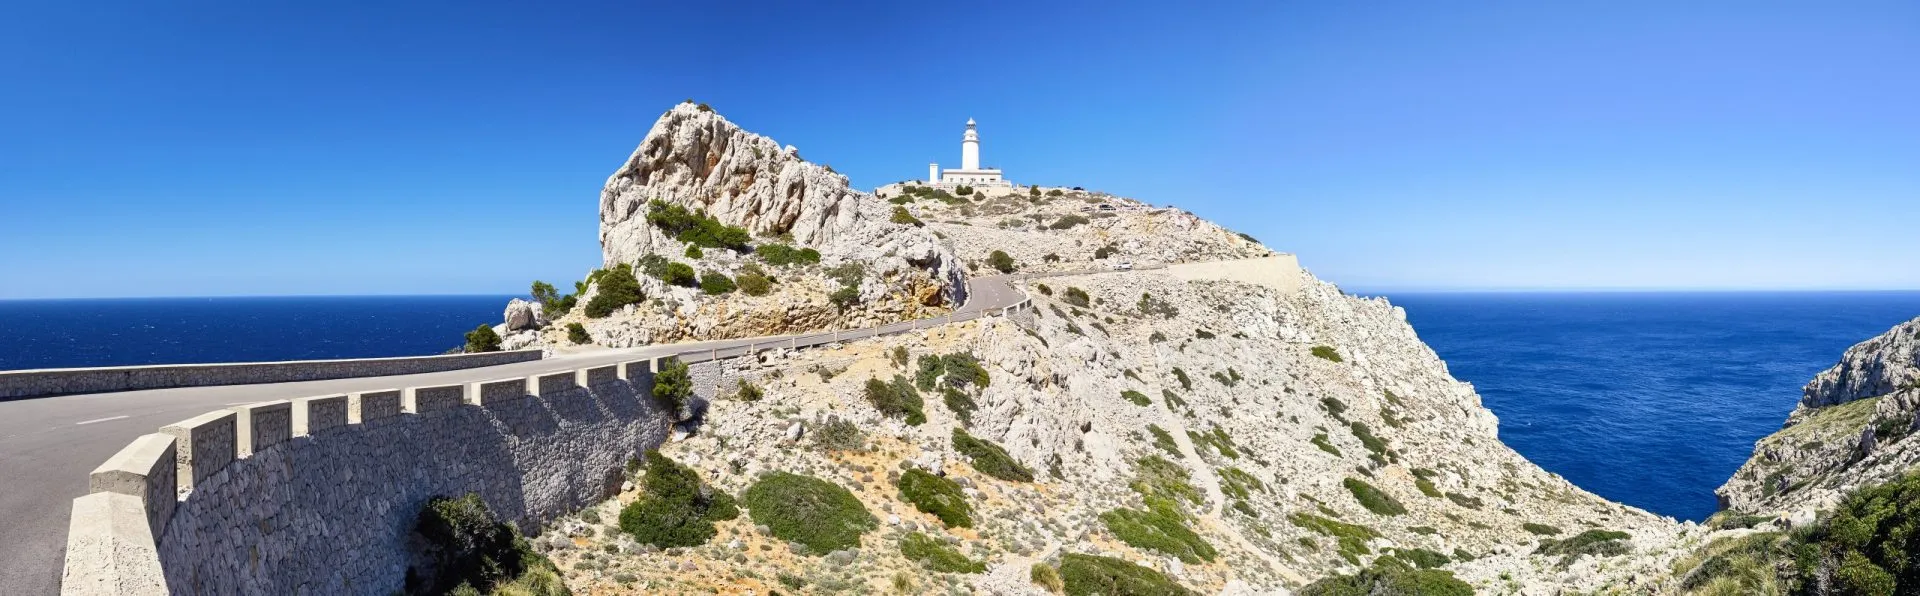 Mallorca panorama cap formentor stockpack adobe stock scaled